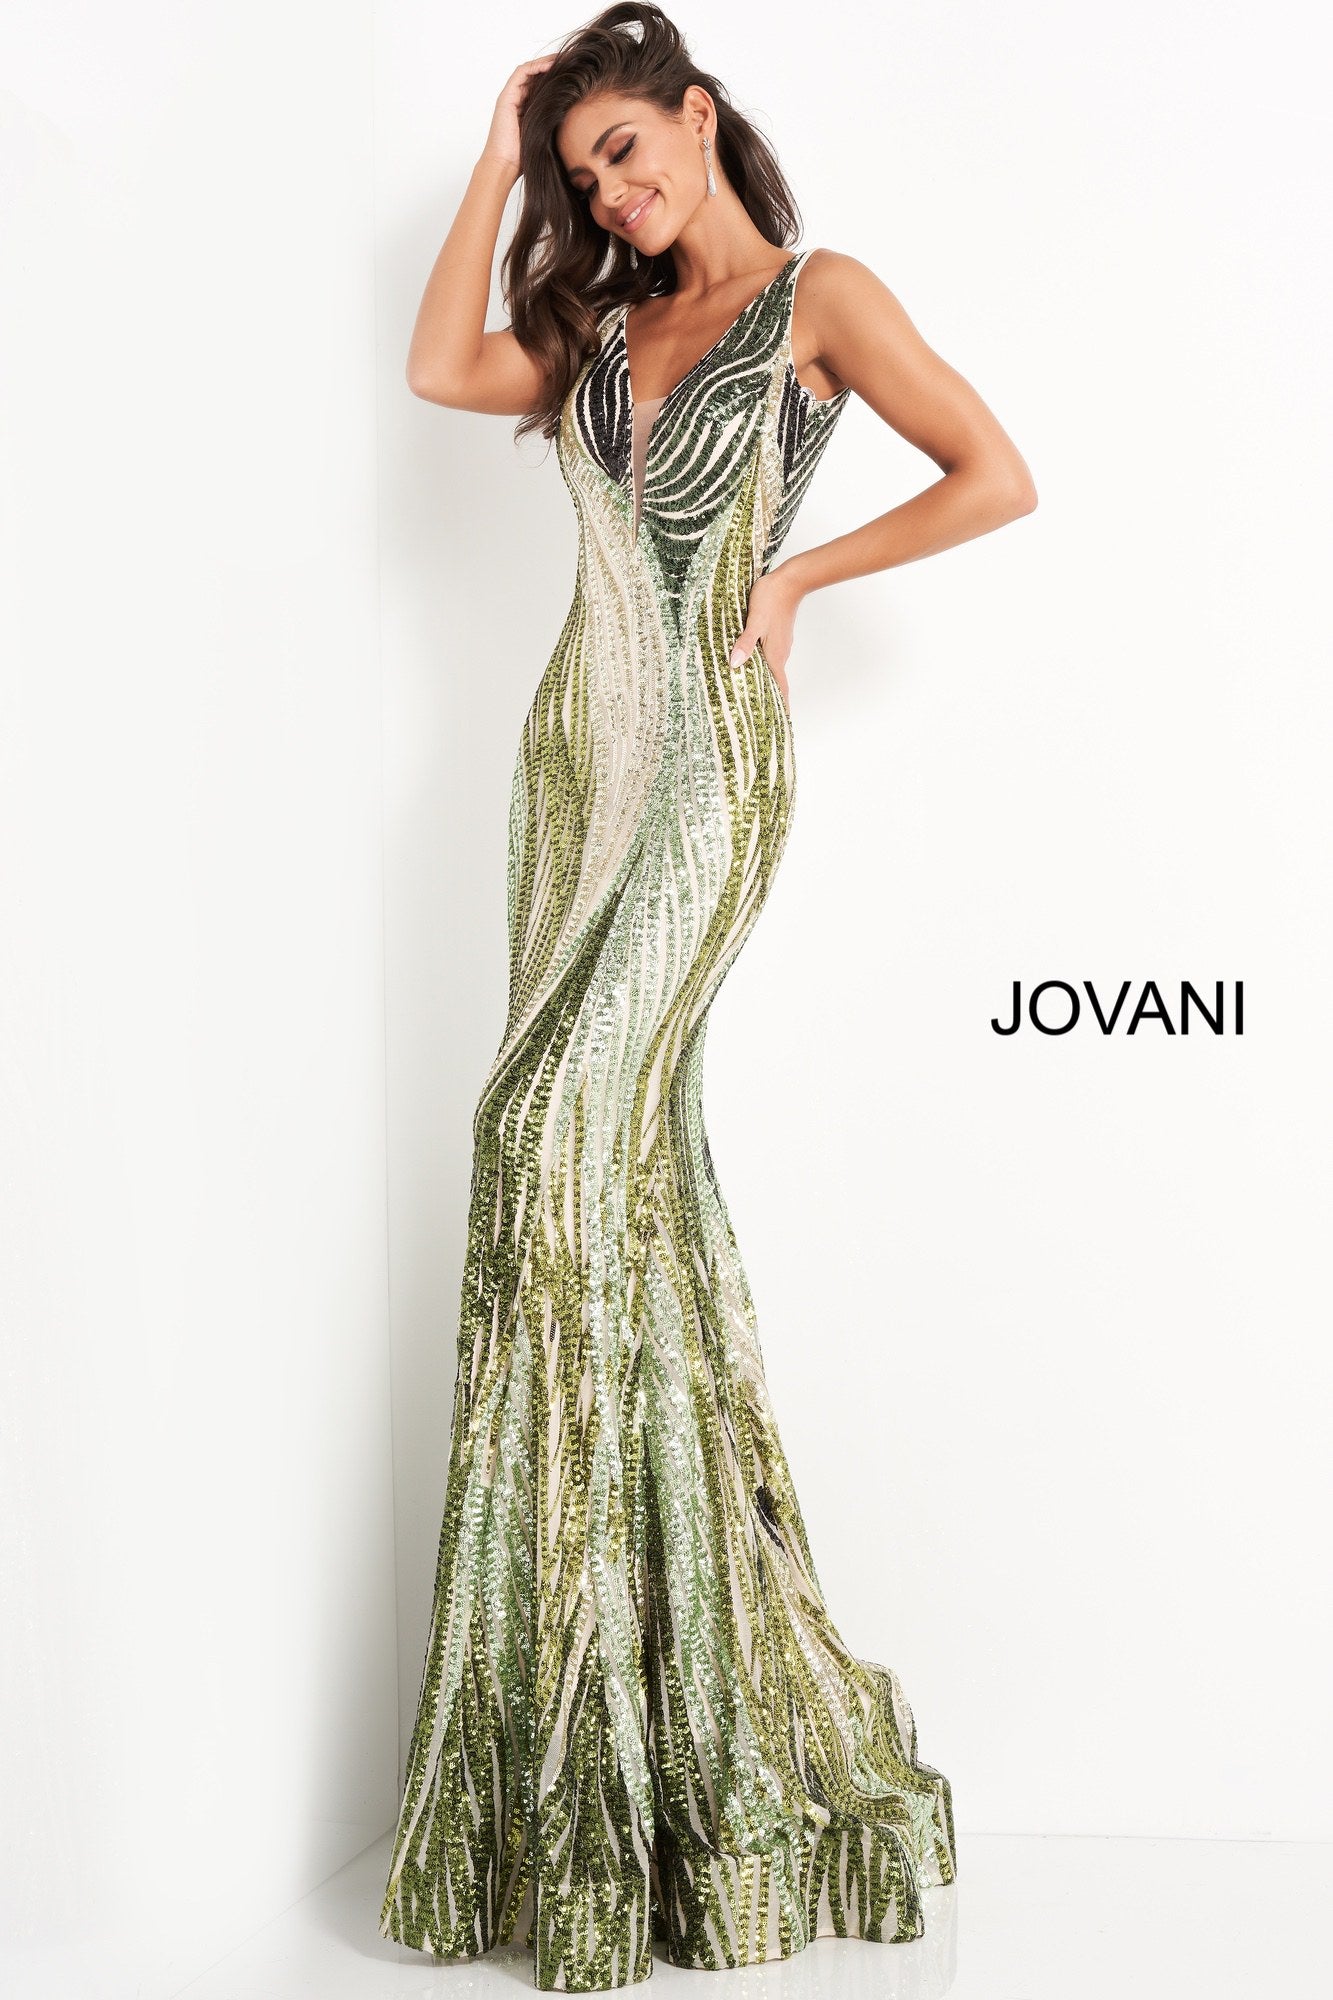 Jovani 05103 is a Long Fitted Mermaid Prom Dress. Featuring a Depp V Plunging Neckline with mesh insert. Green Sequin Multi Embellished Bodice cascading into the lush trumpet skirt. This Pageant Dress Features a sweeping train perfect for the stage!  Available Sizes: 00,0,2,4,6,8,10,12,14,16,18,20,22,24  Available Colors: Green